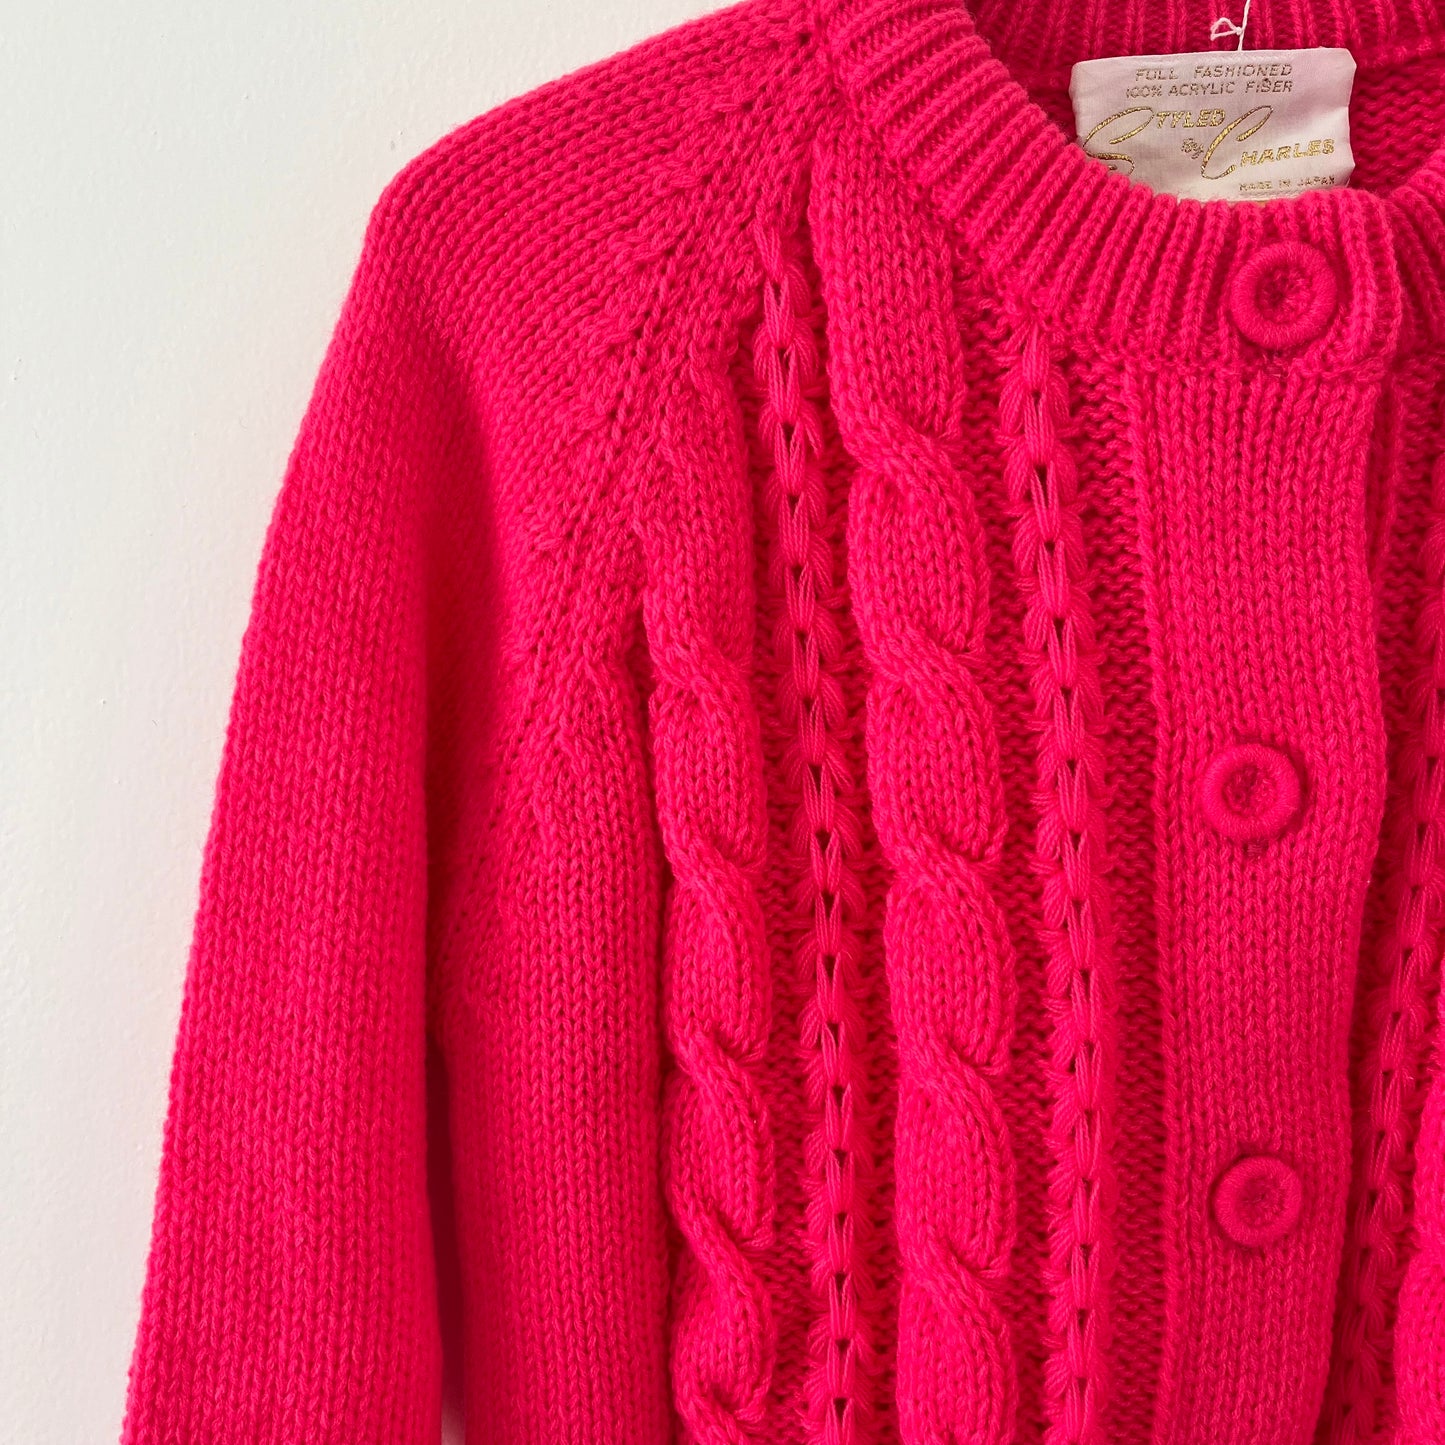 Vintage Hot Pink Sweater (S)